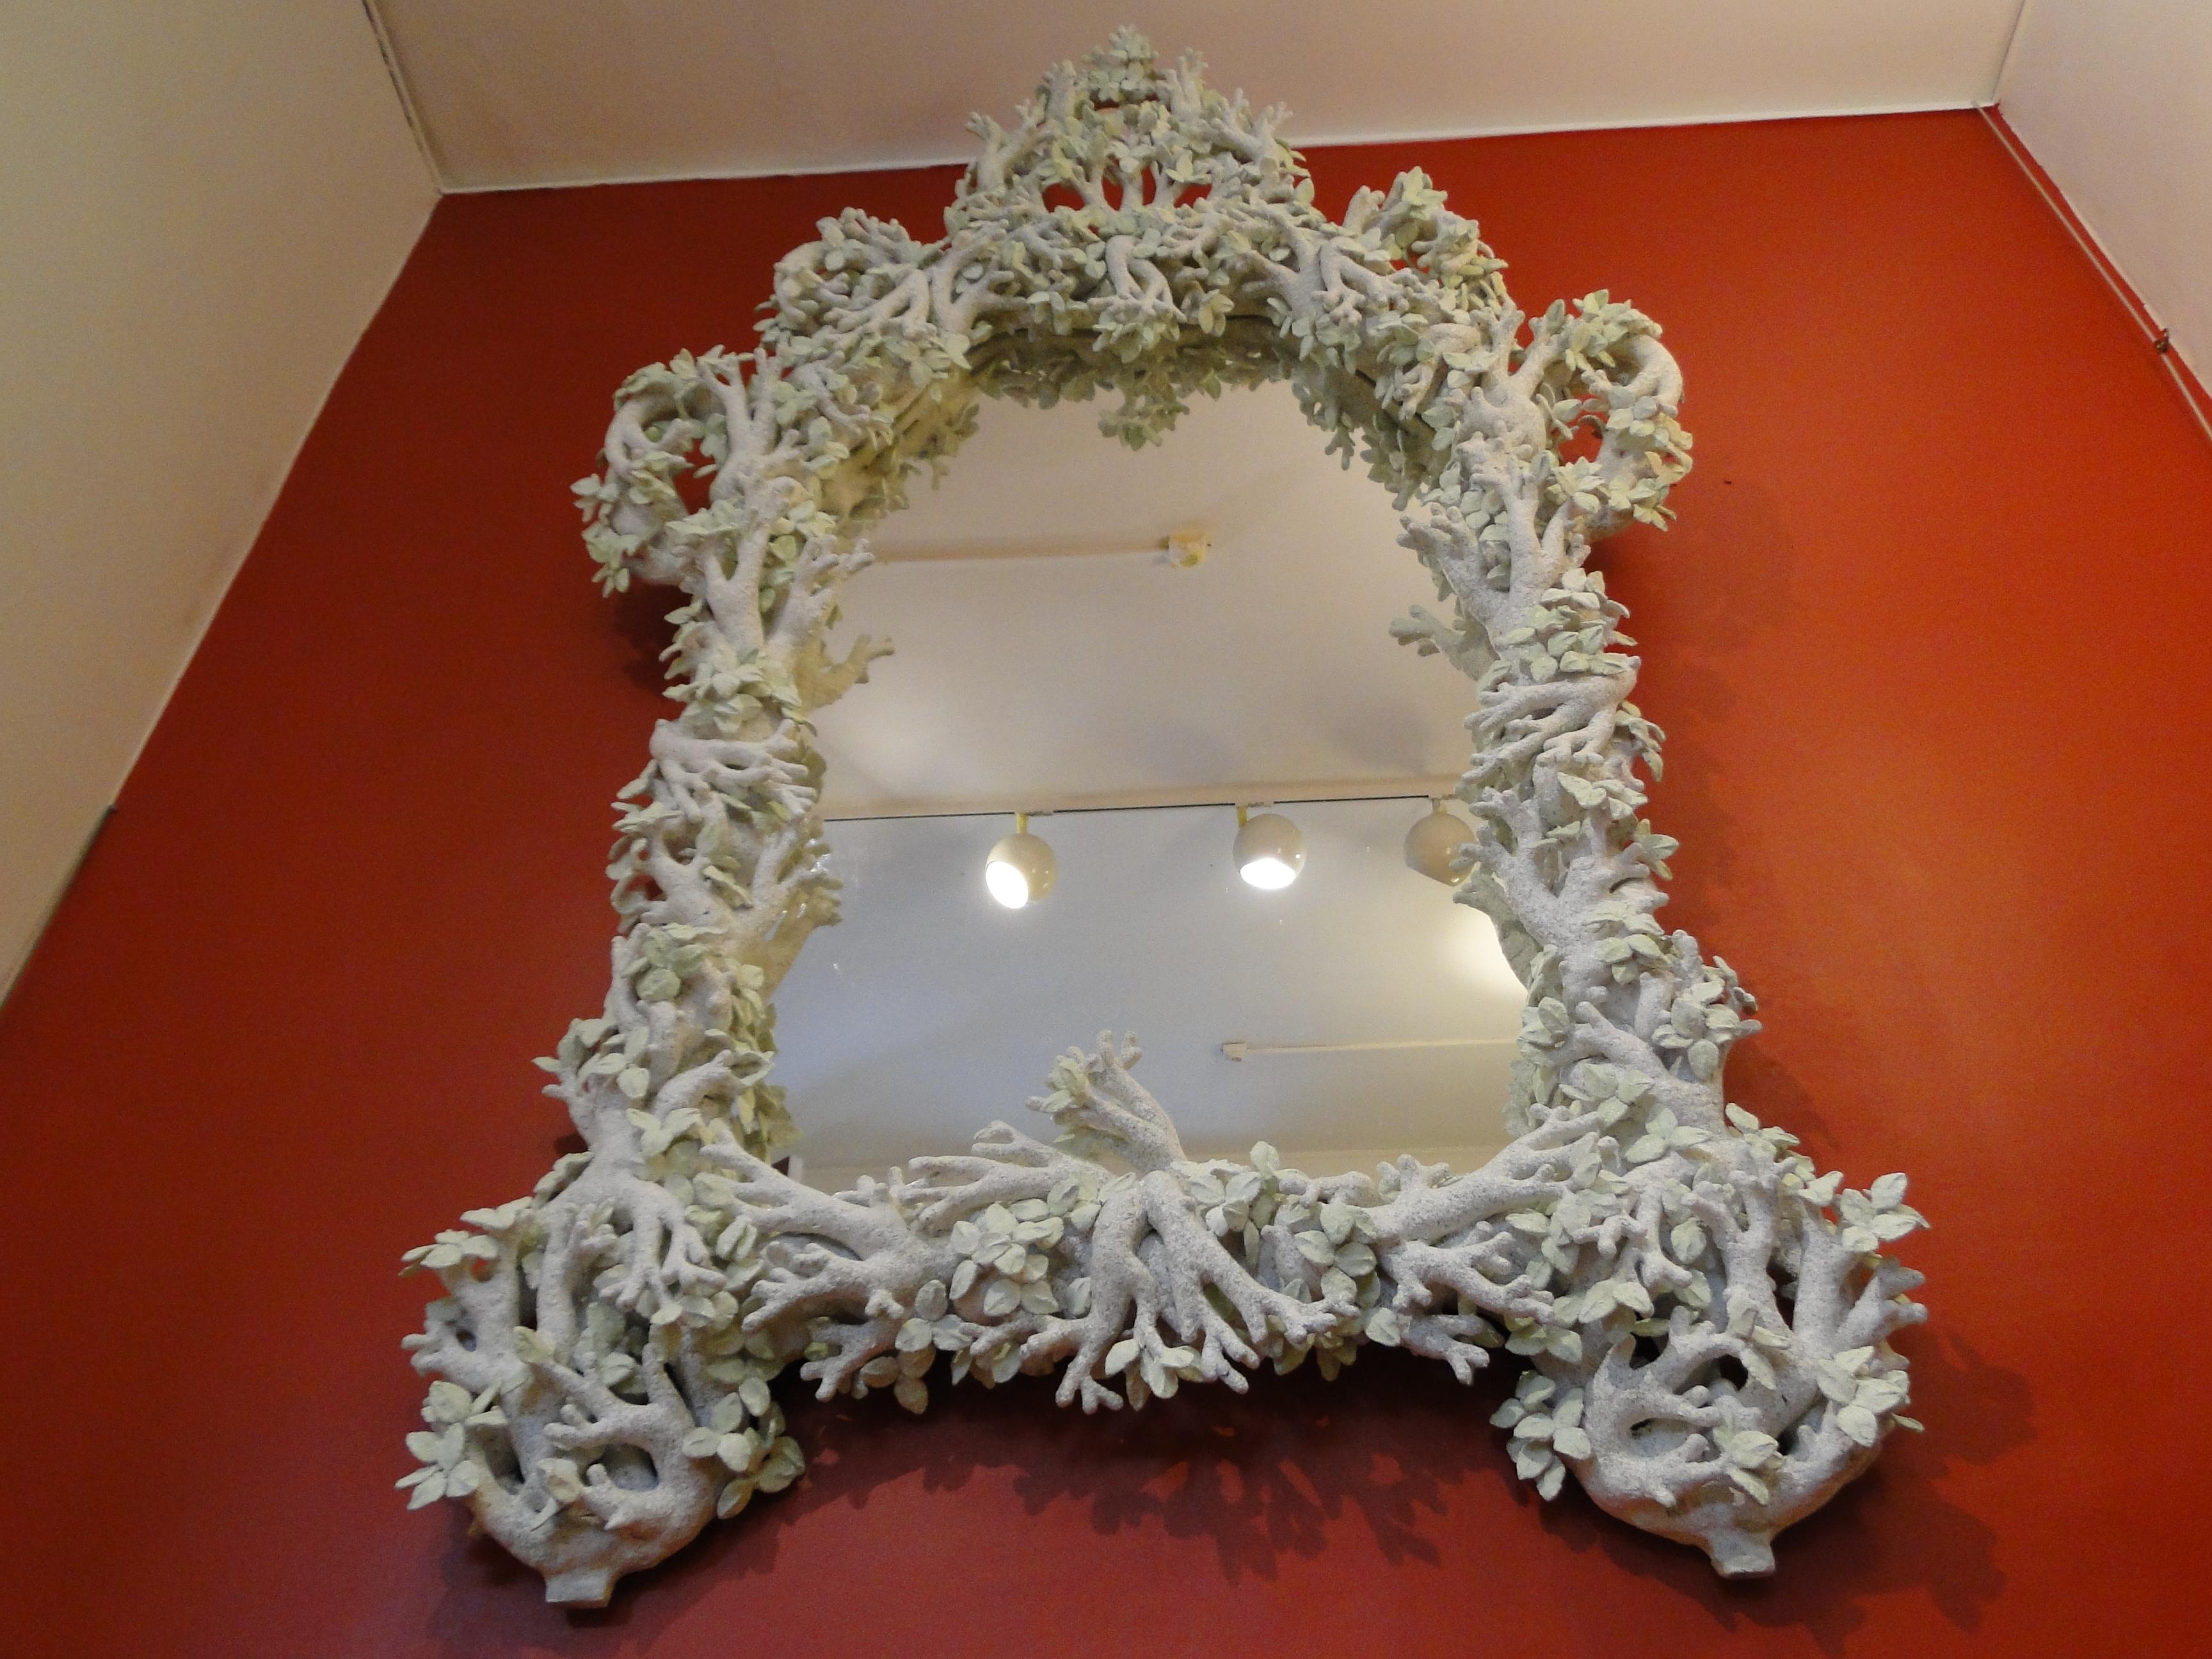 Hand-Crafted Monumental French Mirror Papier Mache Plaster Sculptural Leaf Edouard Chevalier 